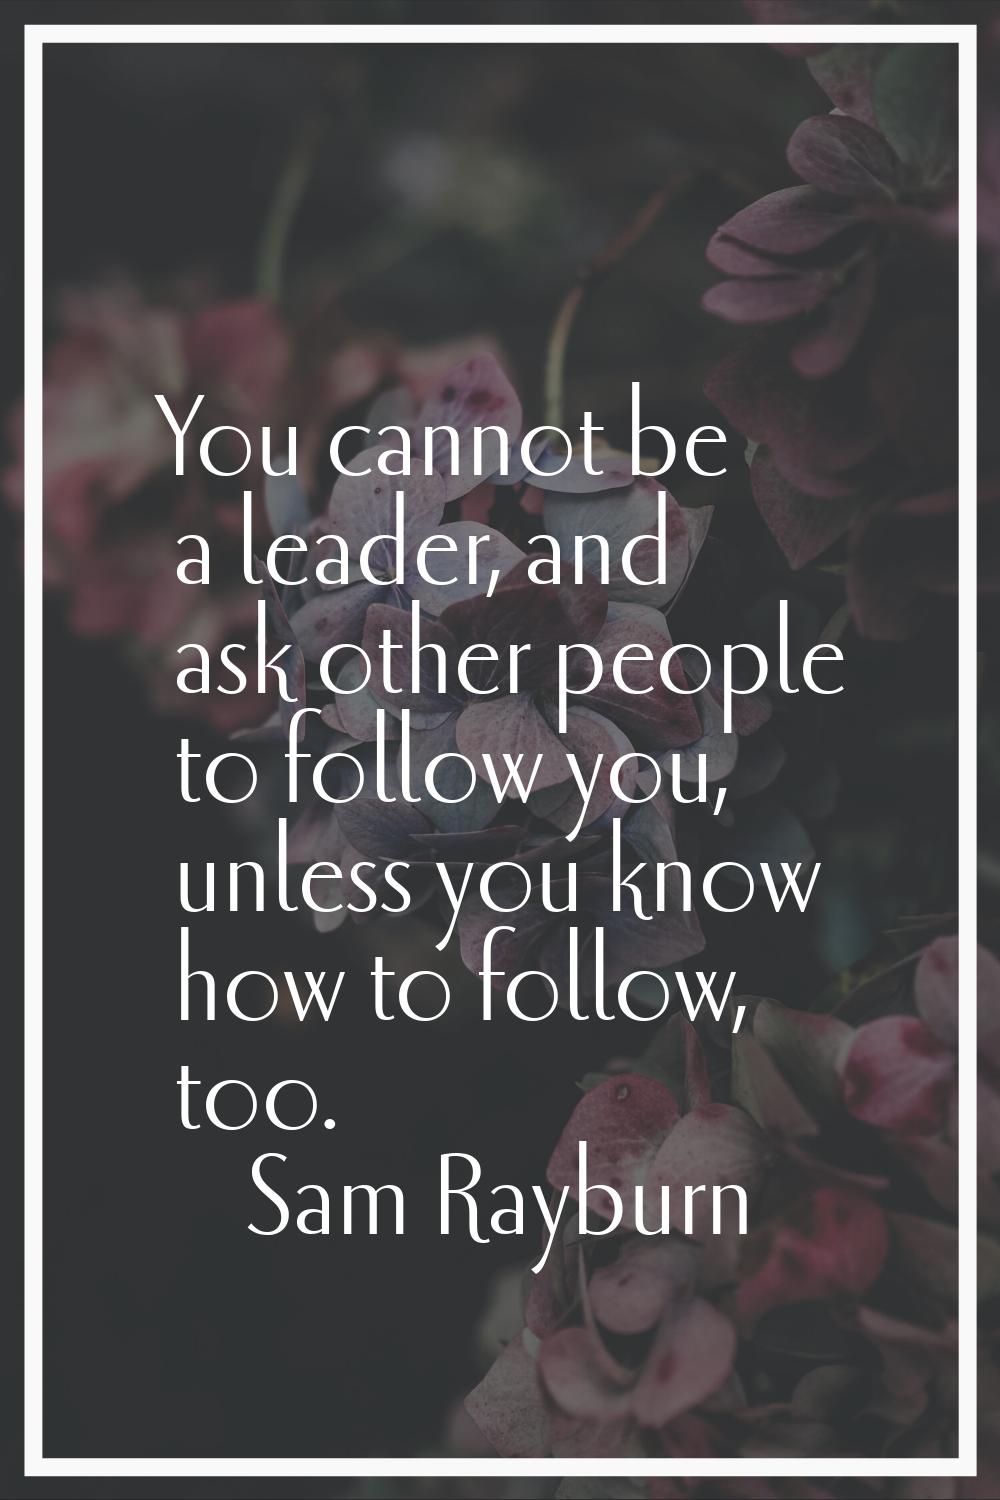 You cannot be a leader, and ask other people to follow you, unless you know how to follow, too.